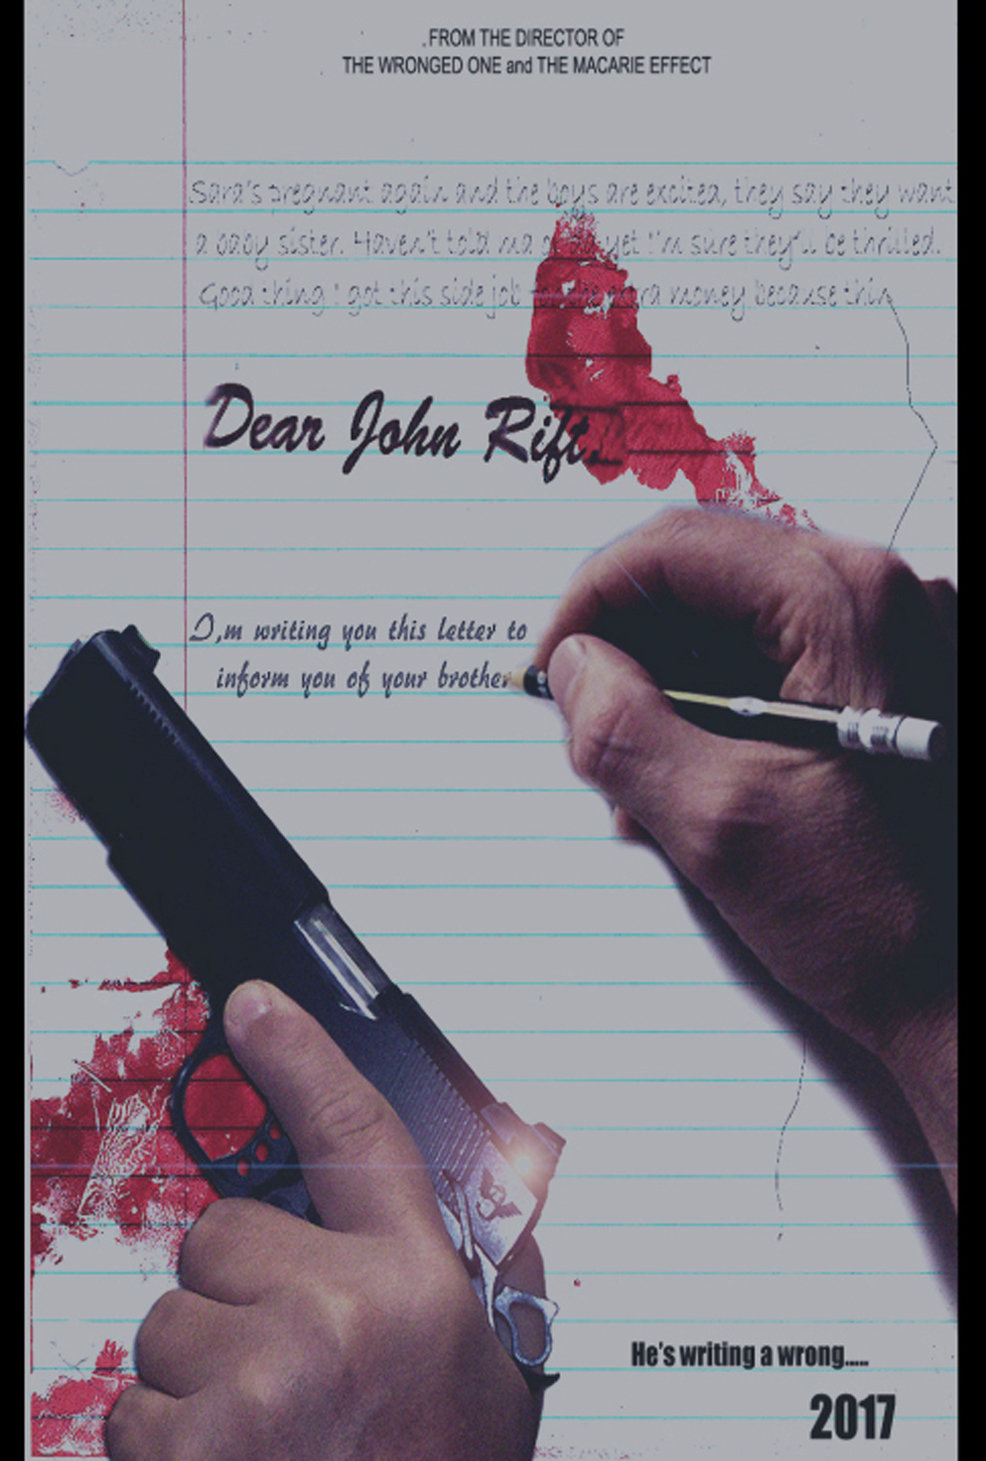 First poster for John Rift directed by Bruce Wabbit. A man receives a letter from his brother, partially written by his killer, informing him of the events that led to his brother's unfortunate demise.